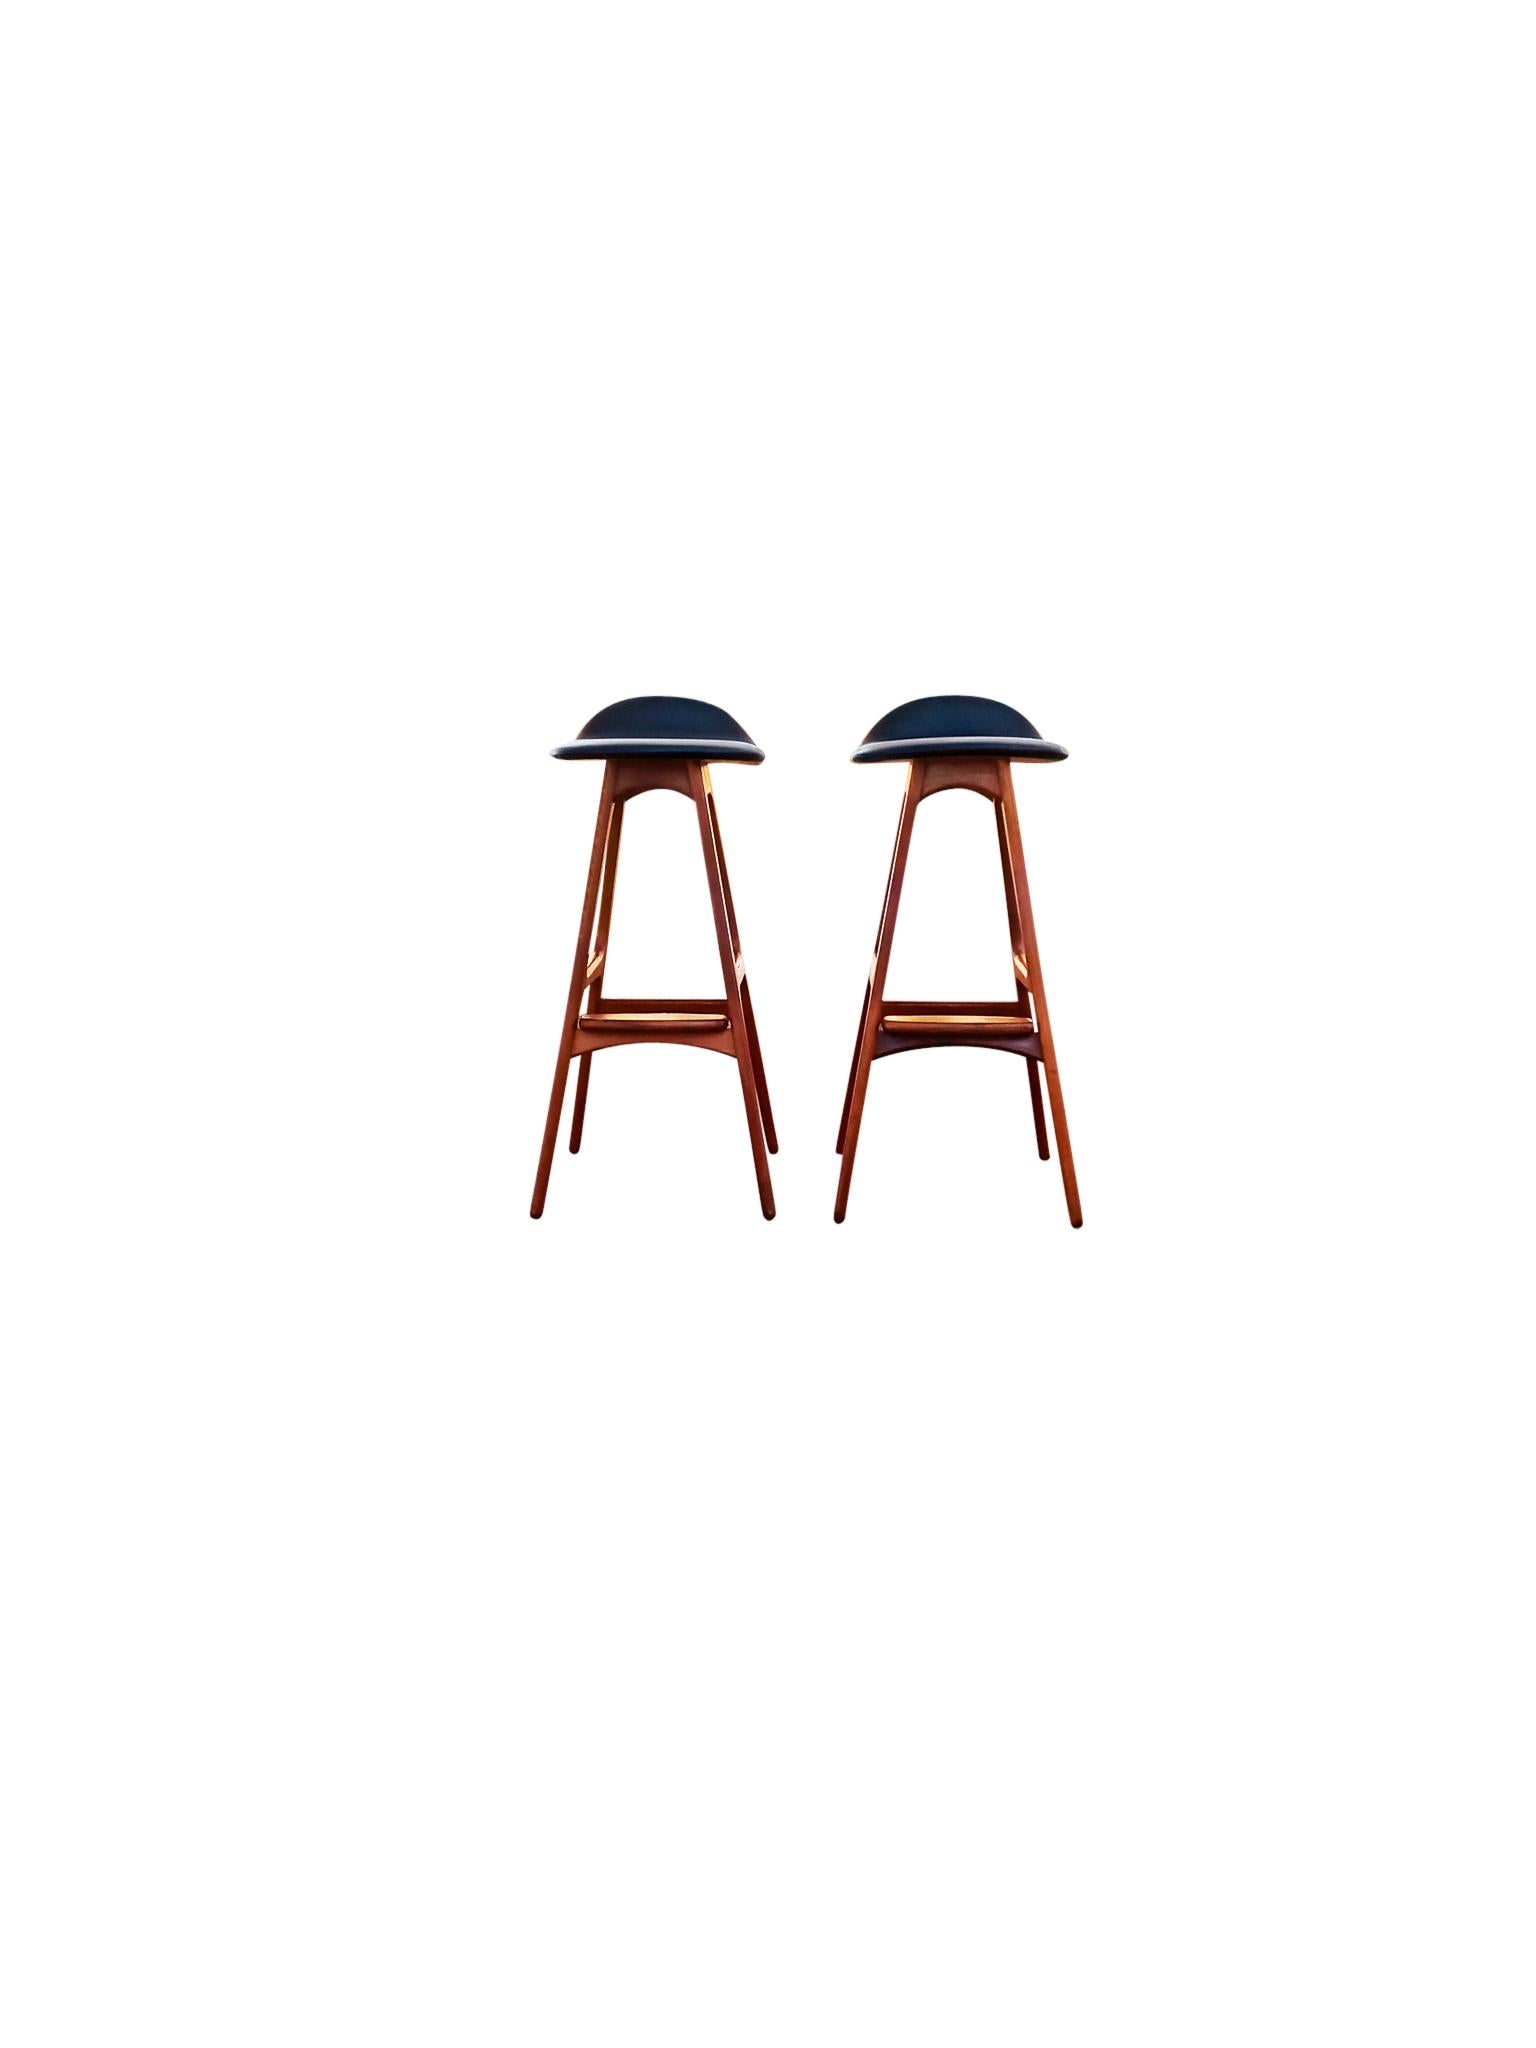 Beautiful pair of bar stools model OD61 by the Danish designer Erik Buck and manufactured by OD Mobler, 1960, A sculptural, elegant and comfortable pair of barstools. Frame is teak, footrest is rosewood, and seat is upholstered in black faux